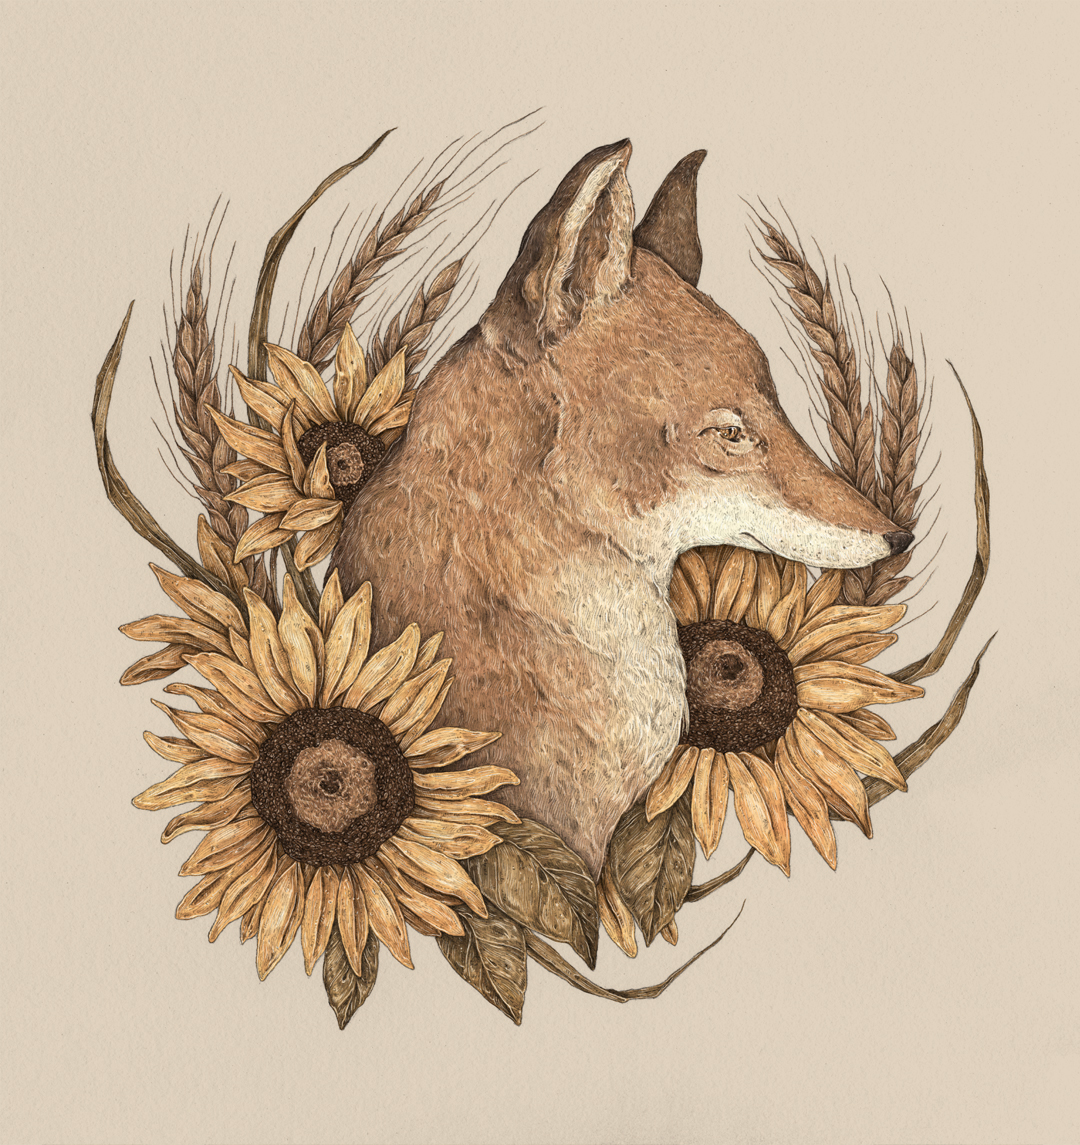 coyoteandsunflowers-jessicaroux-ballpitmagsubmission